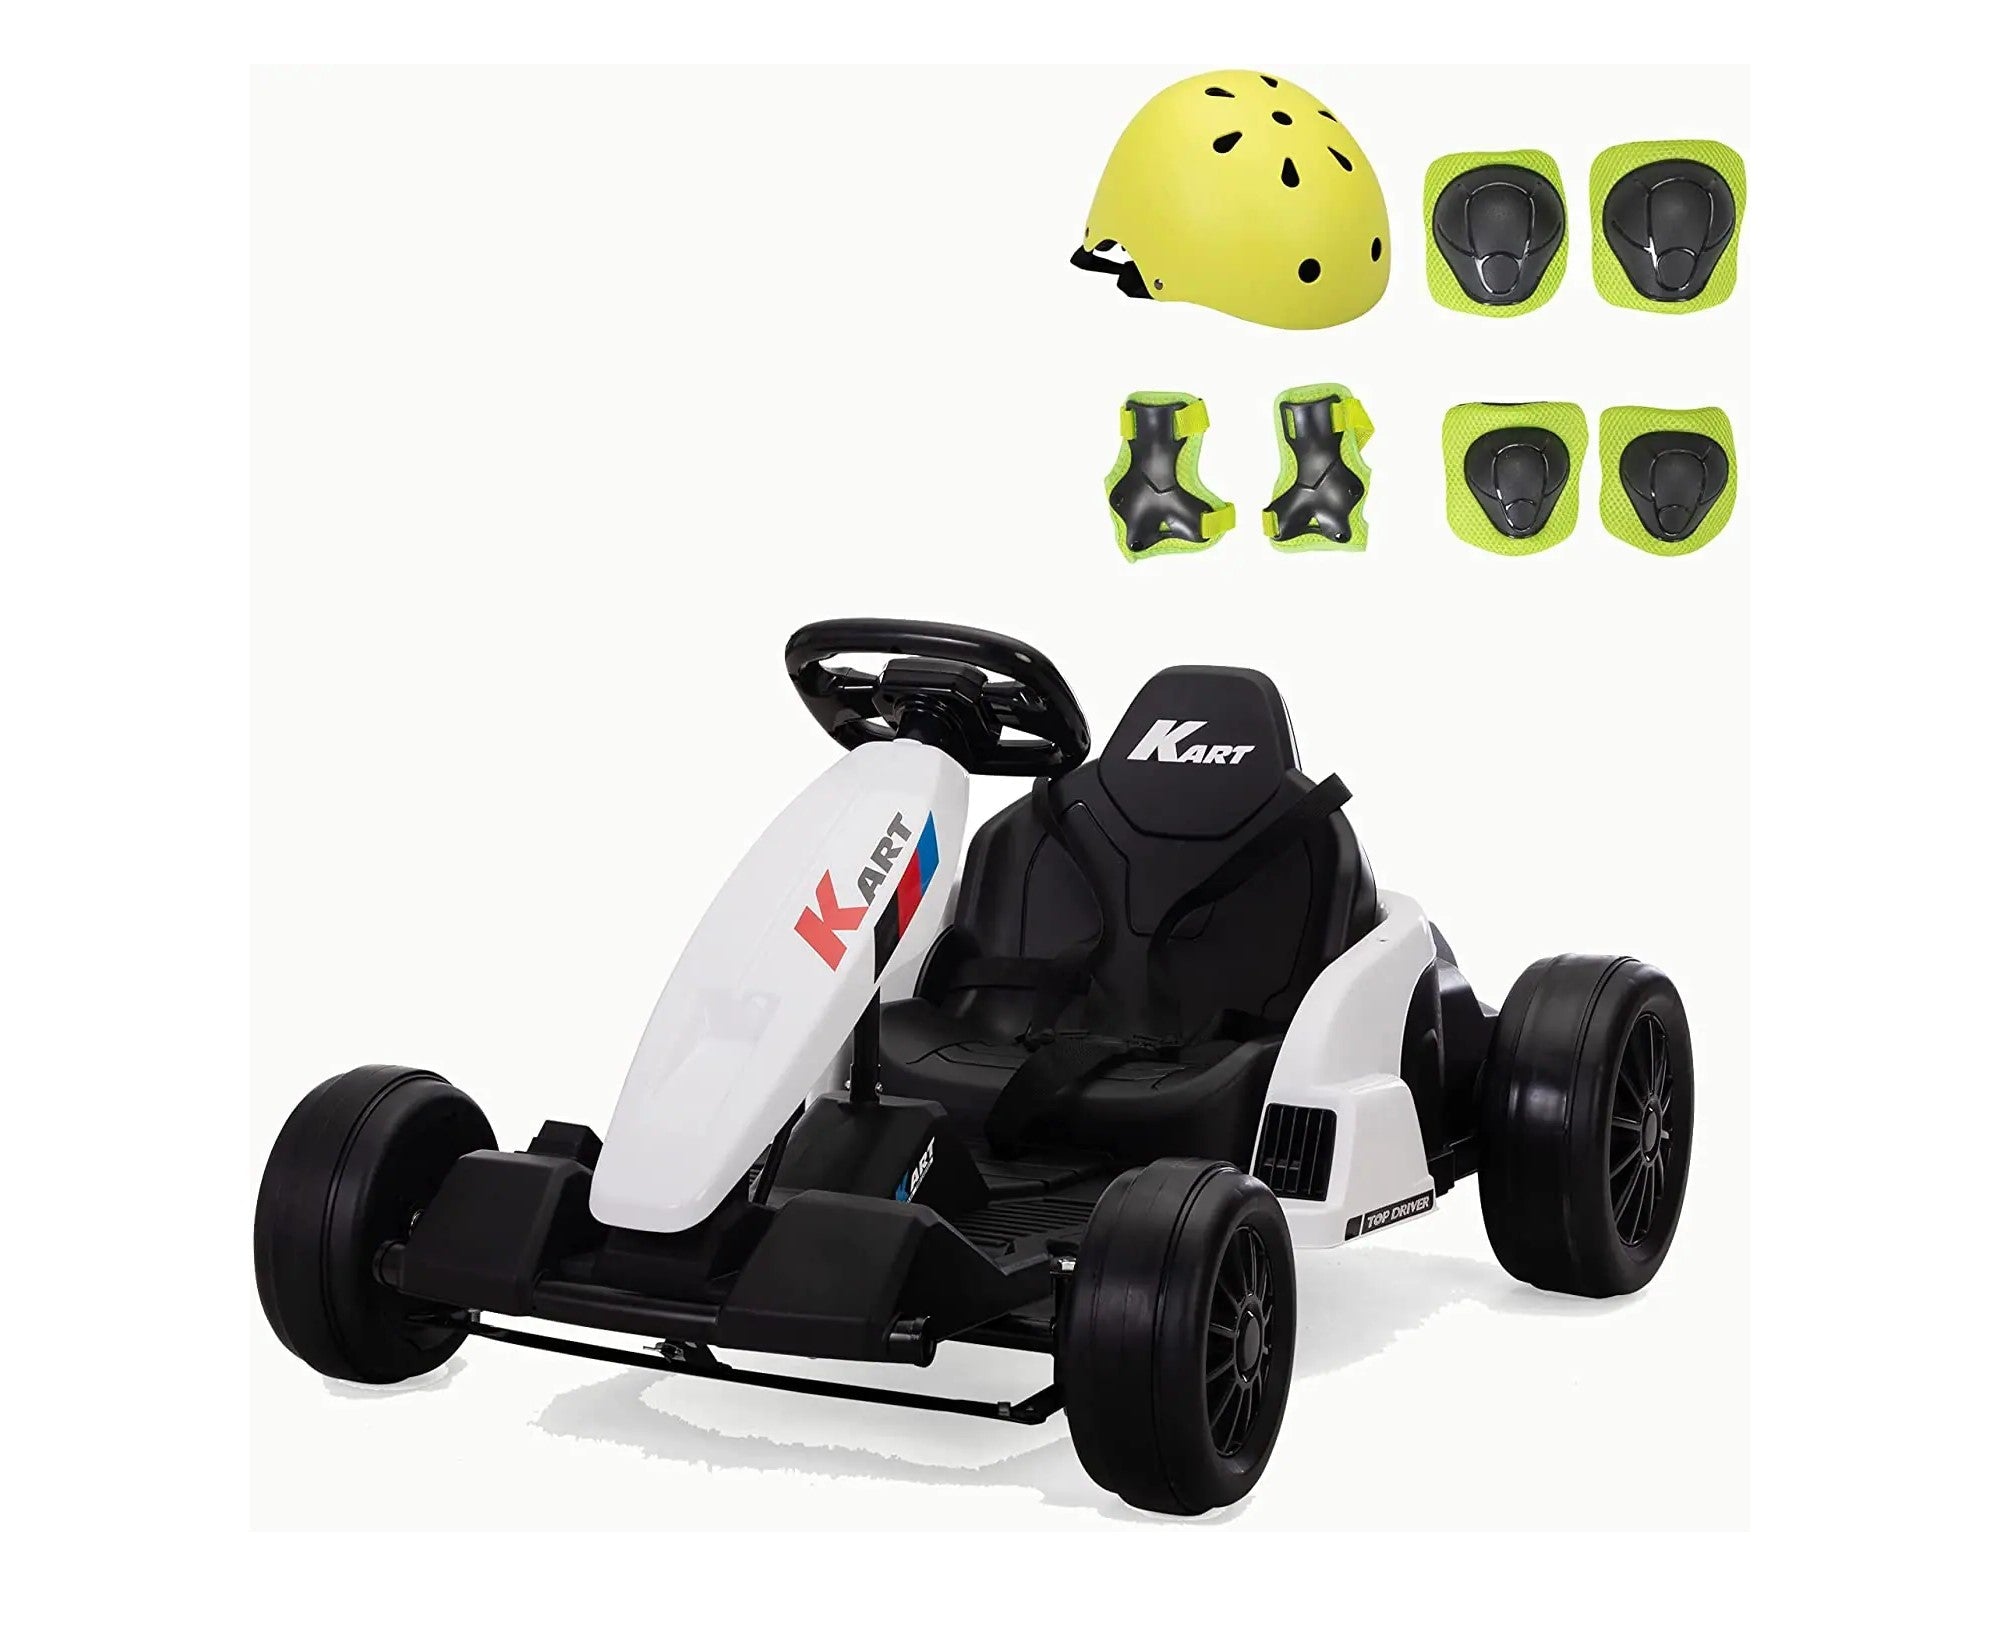 Tobbi 24V Electric Kids Go Kart, Battery Powered Drift Racing Ride On Toy Car with Protective Suits - kids electric Go Kart, children's toy Go Kart White